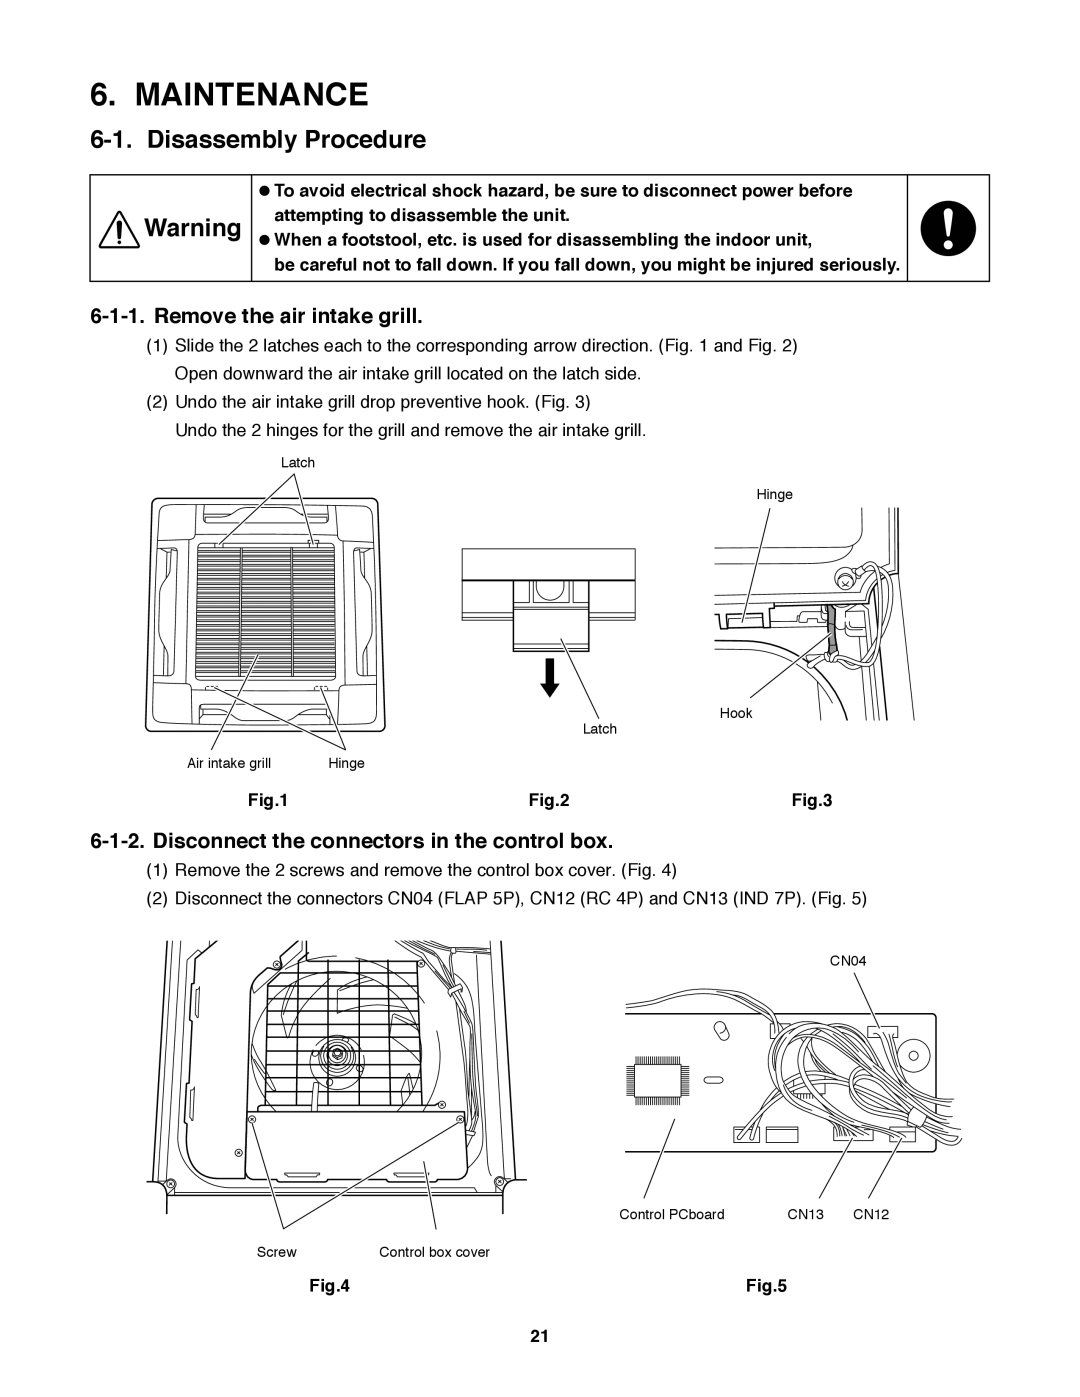 Sanyo XMHS1272, XMHS0972 service manual Maintenance, Disassembly Procedure, Remove the air intake grill 